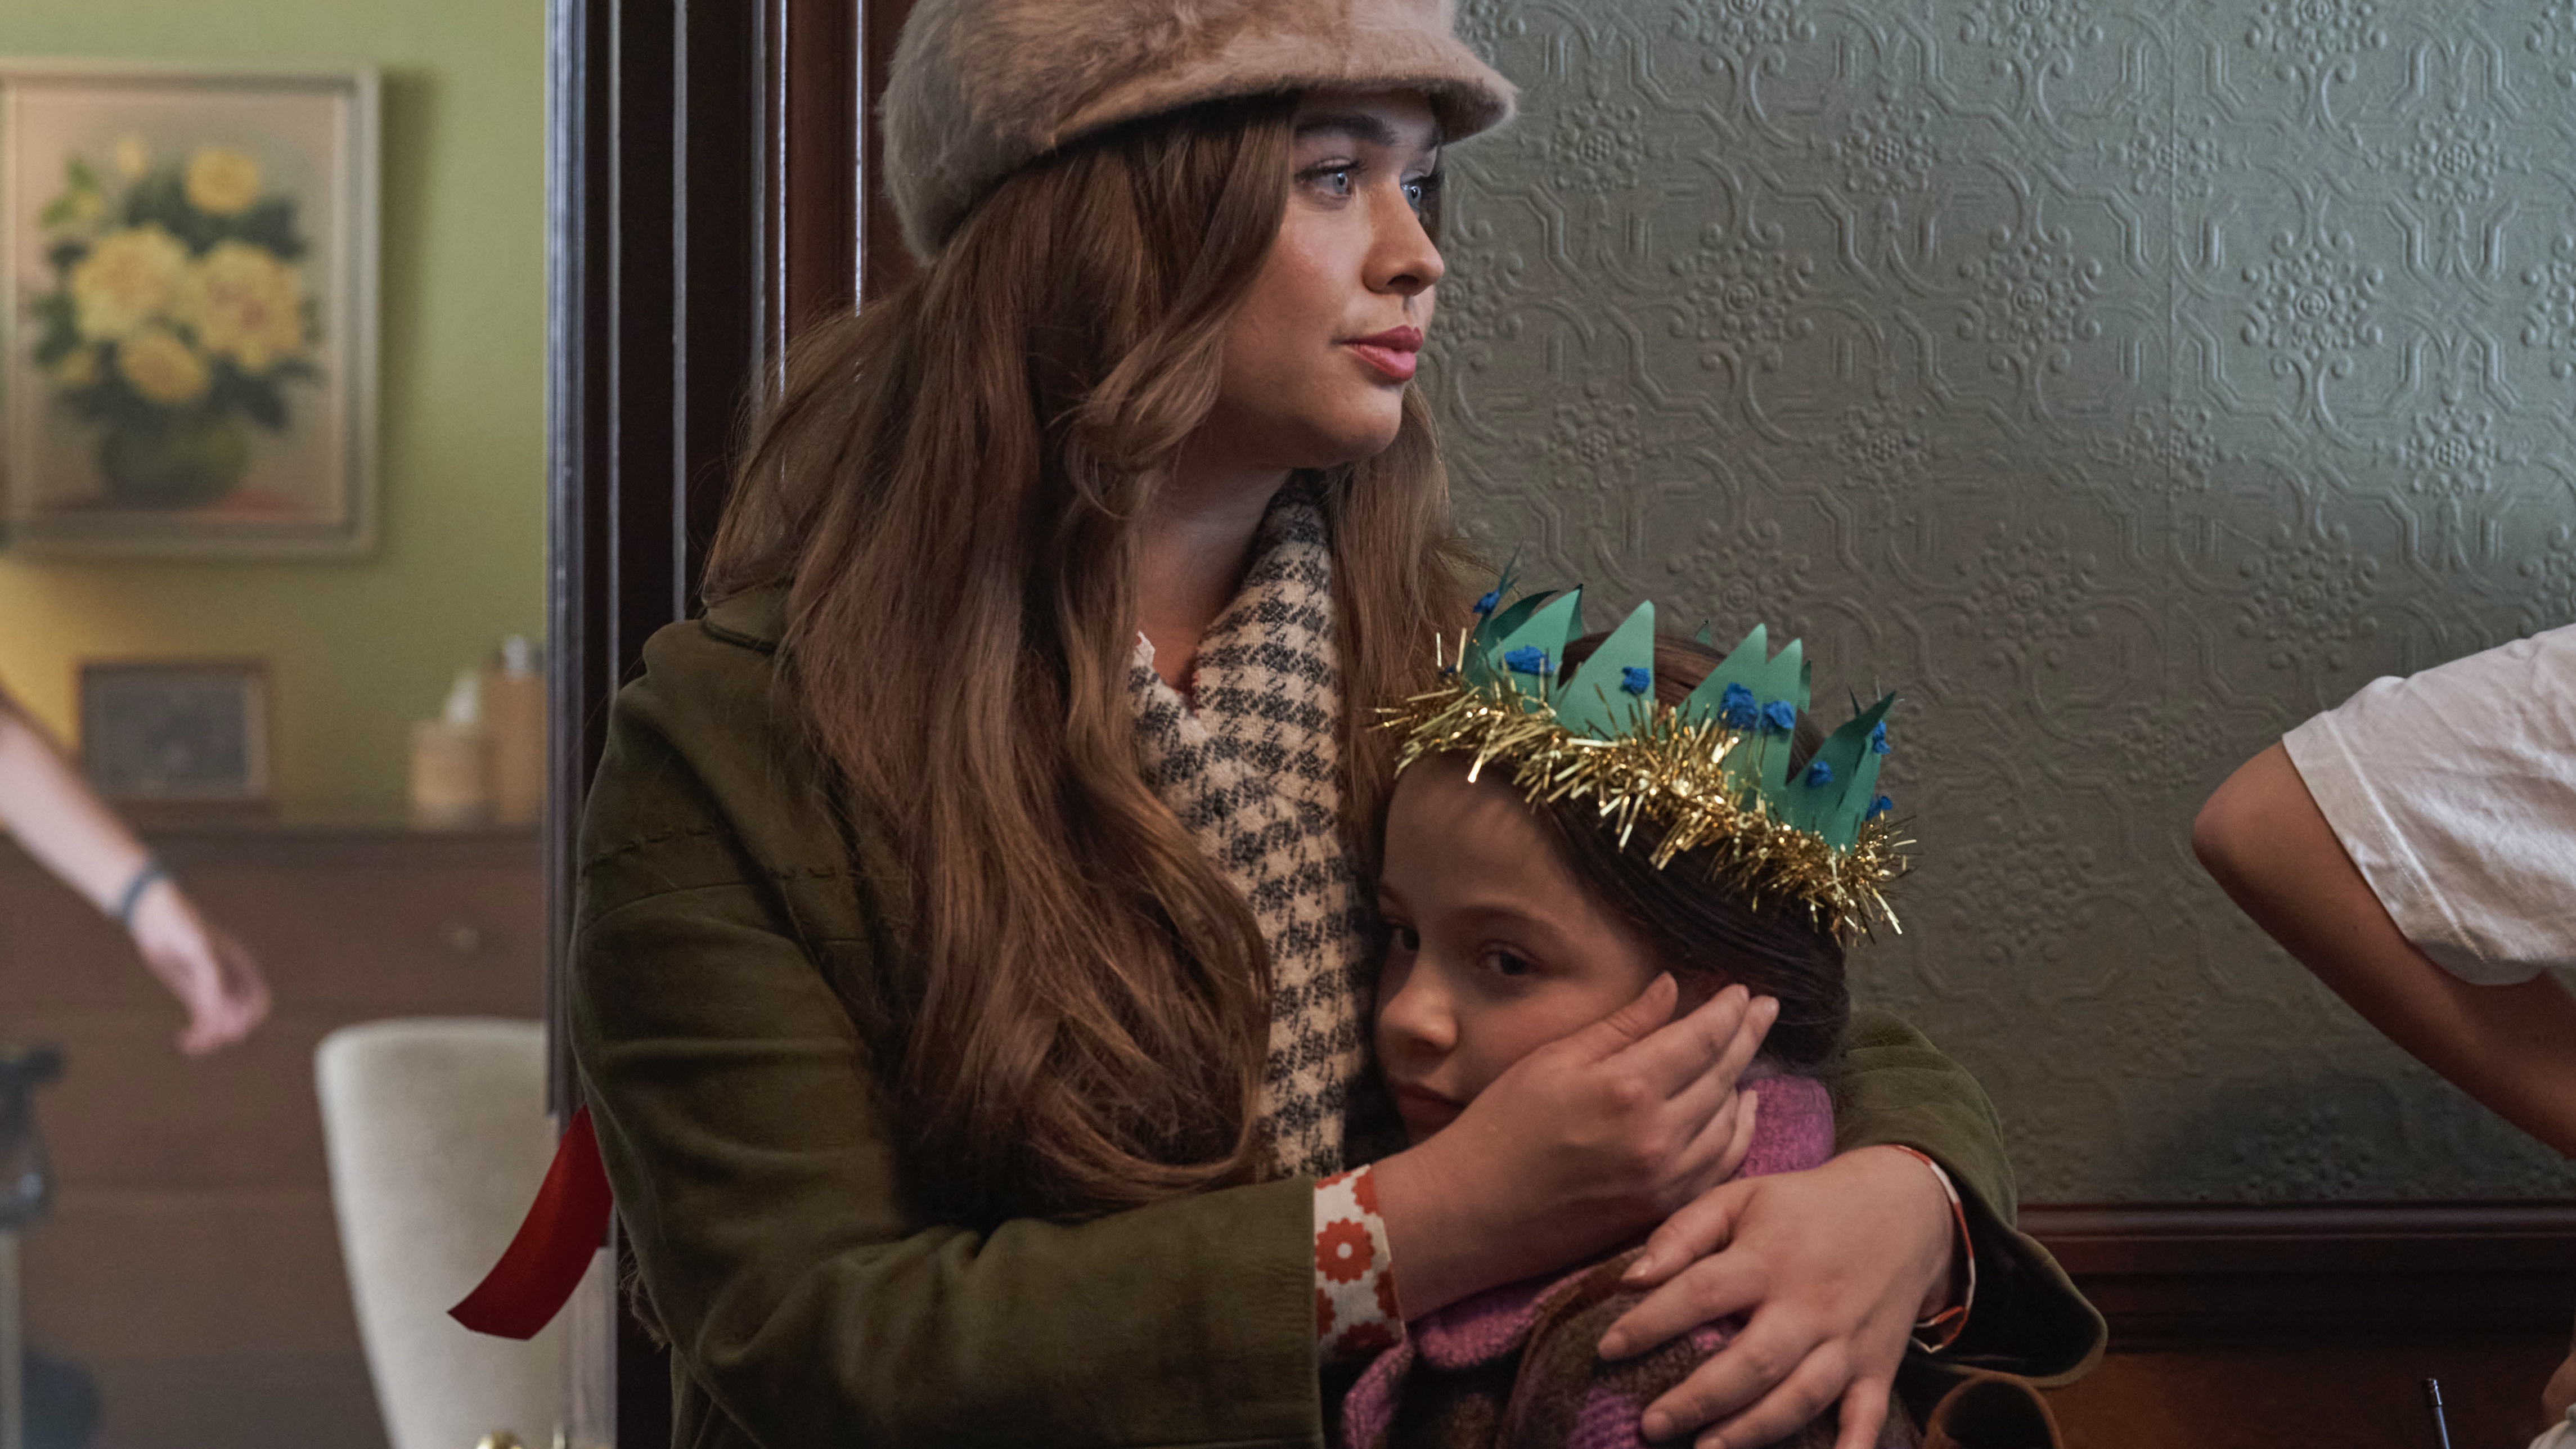 Megan Cusack in a fur hat as Nancy cradles Francesca Fullilove in a Christmas hat as Colette in Call the Midwife.